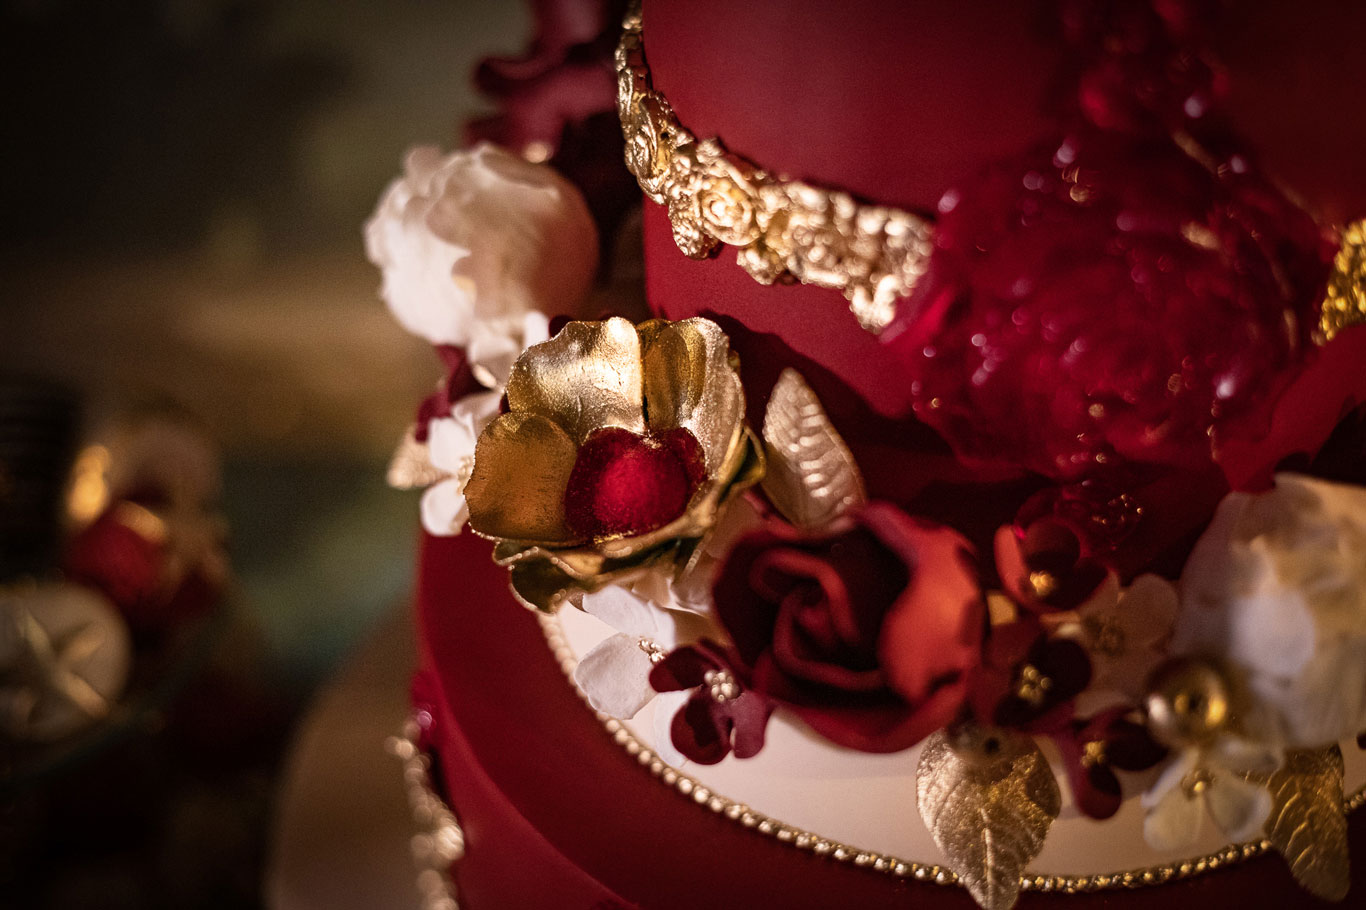 Gold sugar flowers on a deep red ornate wedding cake by GC Couture